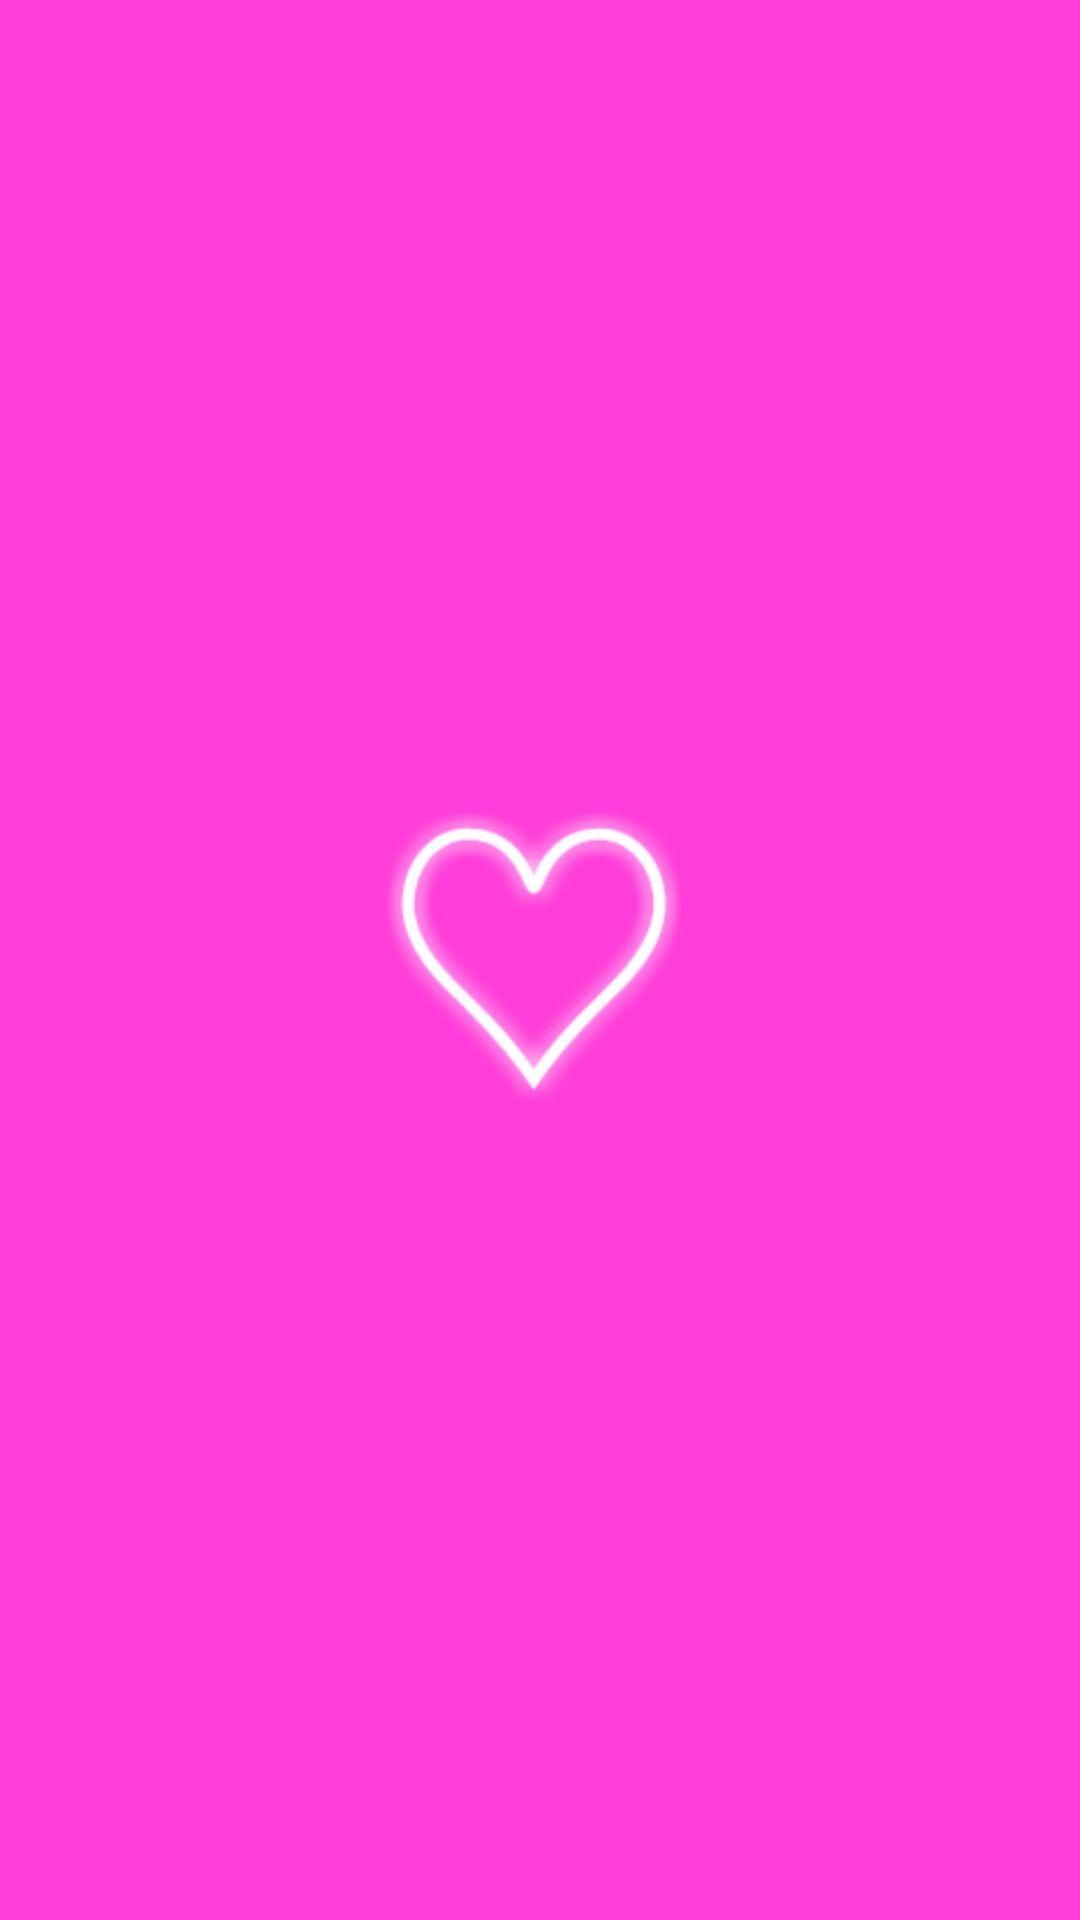 solid neon pink backgrounds